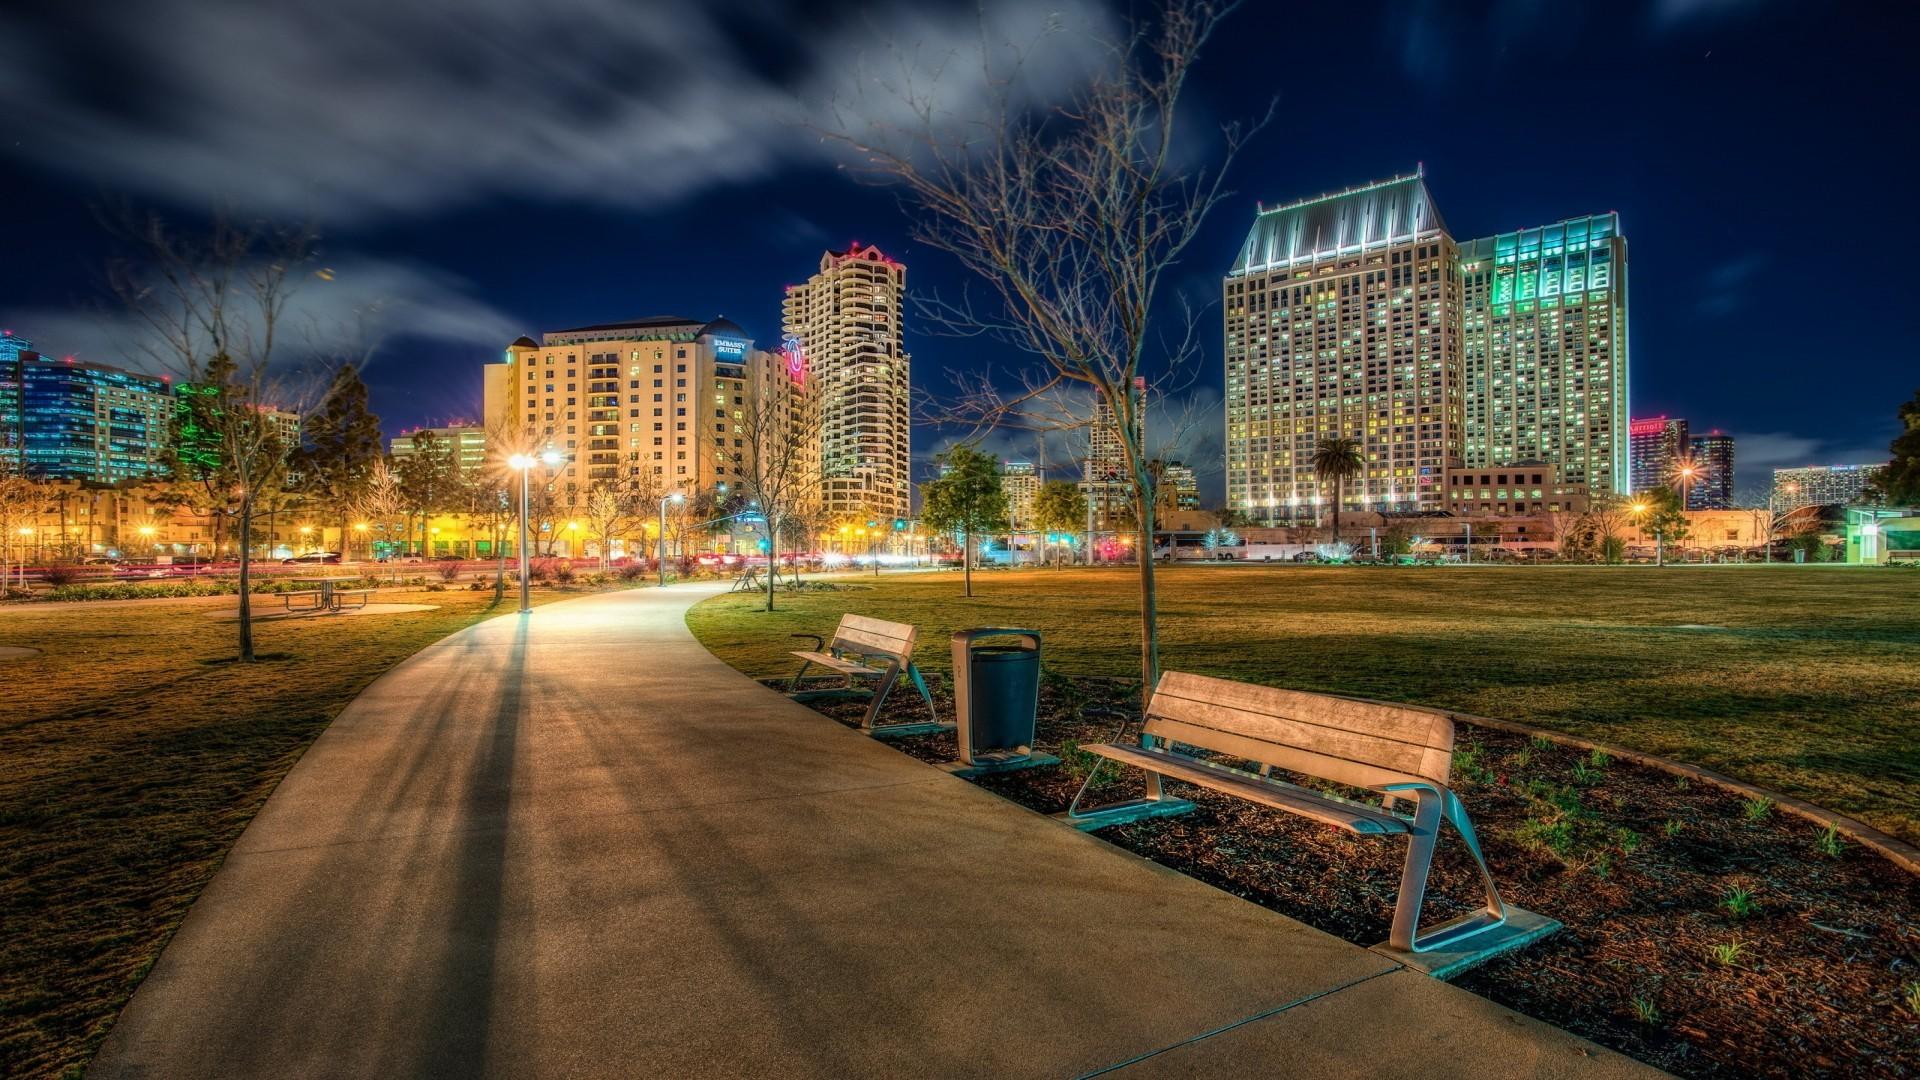 Other, Wonderful, City, Park, Night, HDr, Lights, Path, Stretched